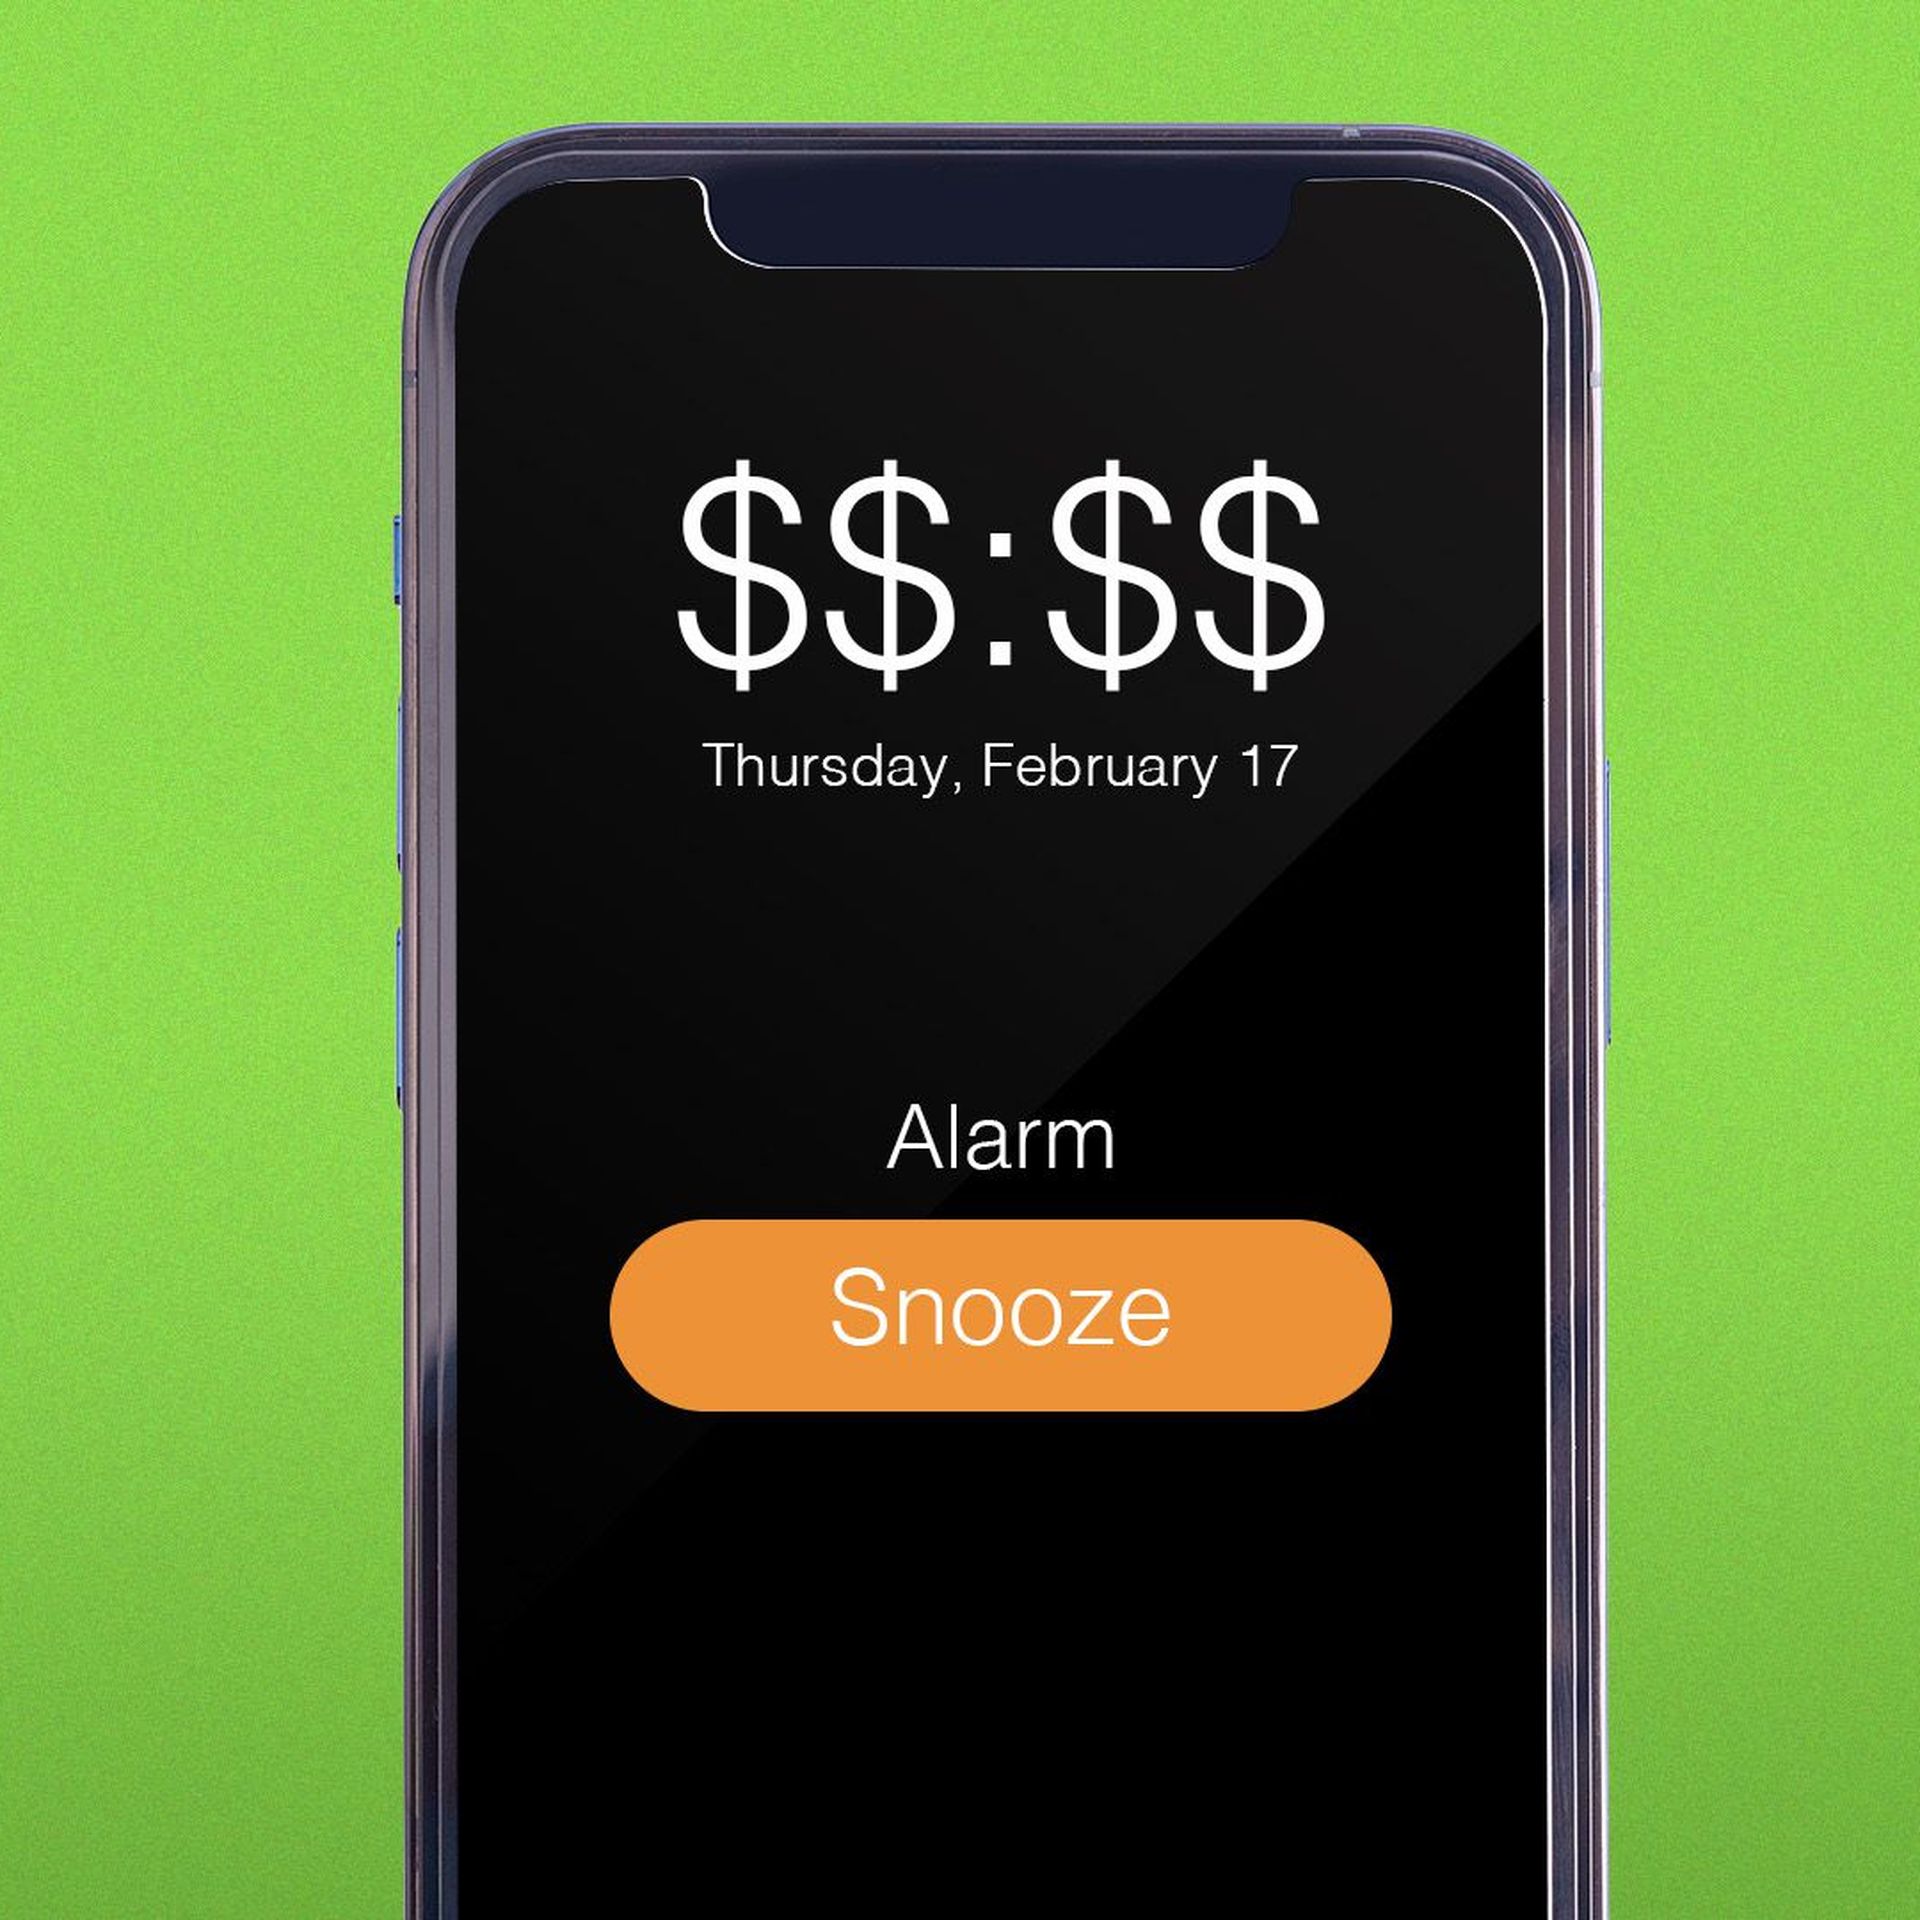 Illustration of an iPhone displaying the time "$$:$$" and an alarm snooze button.